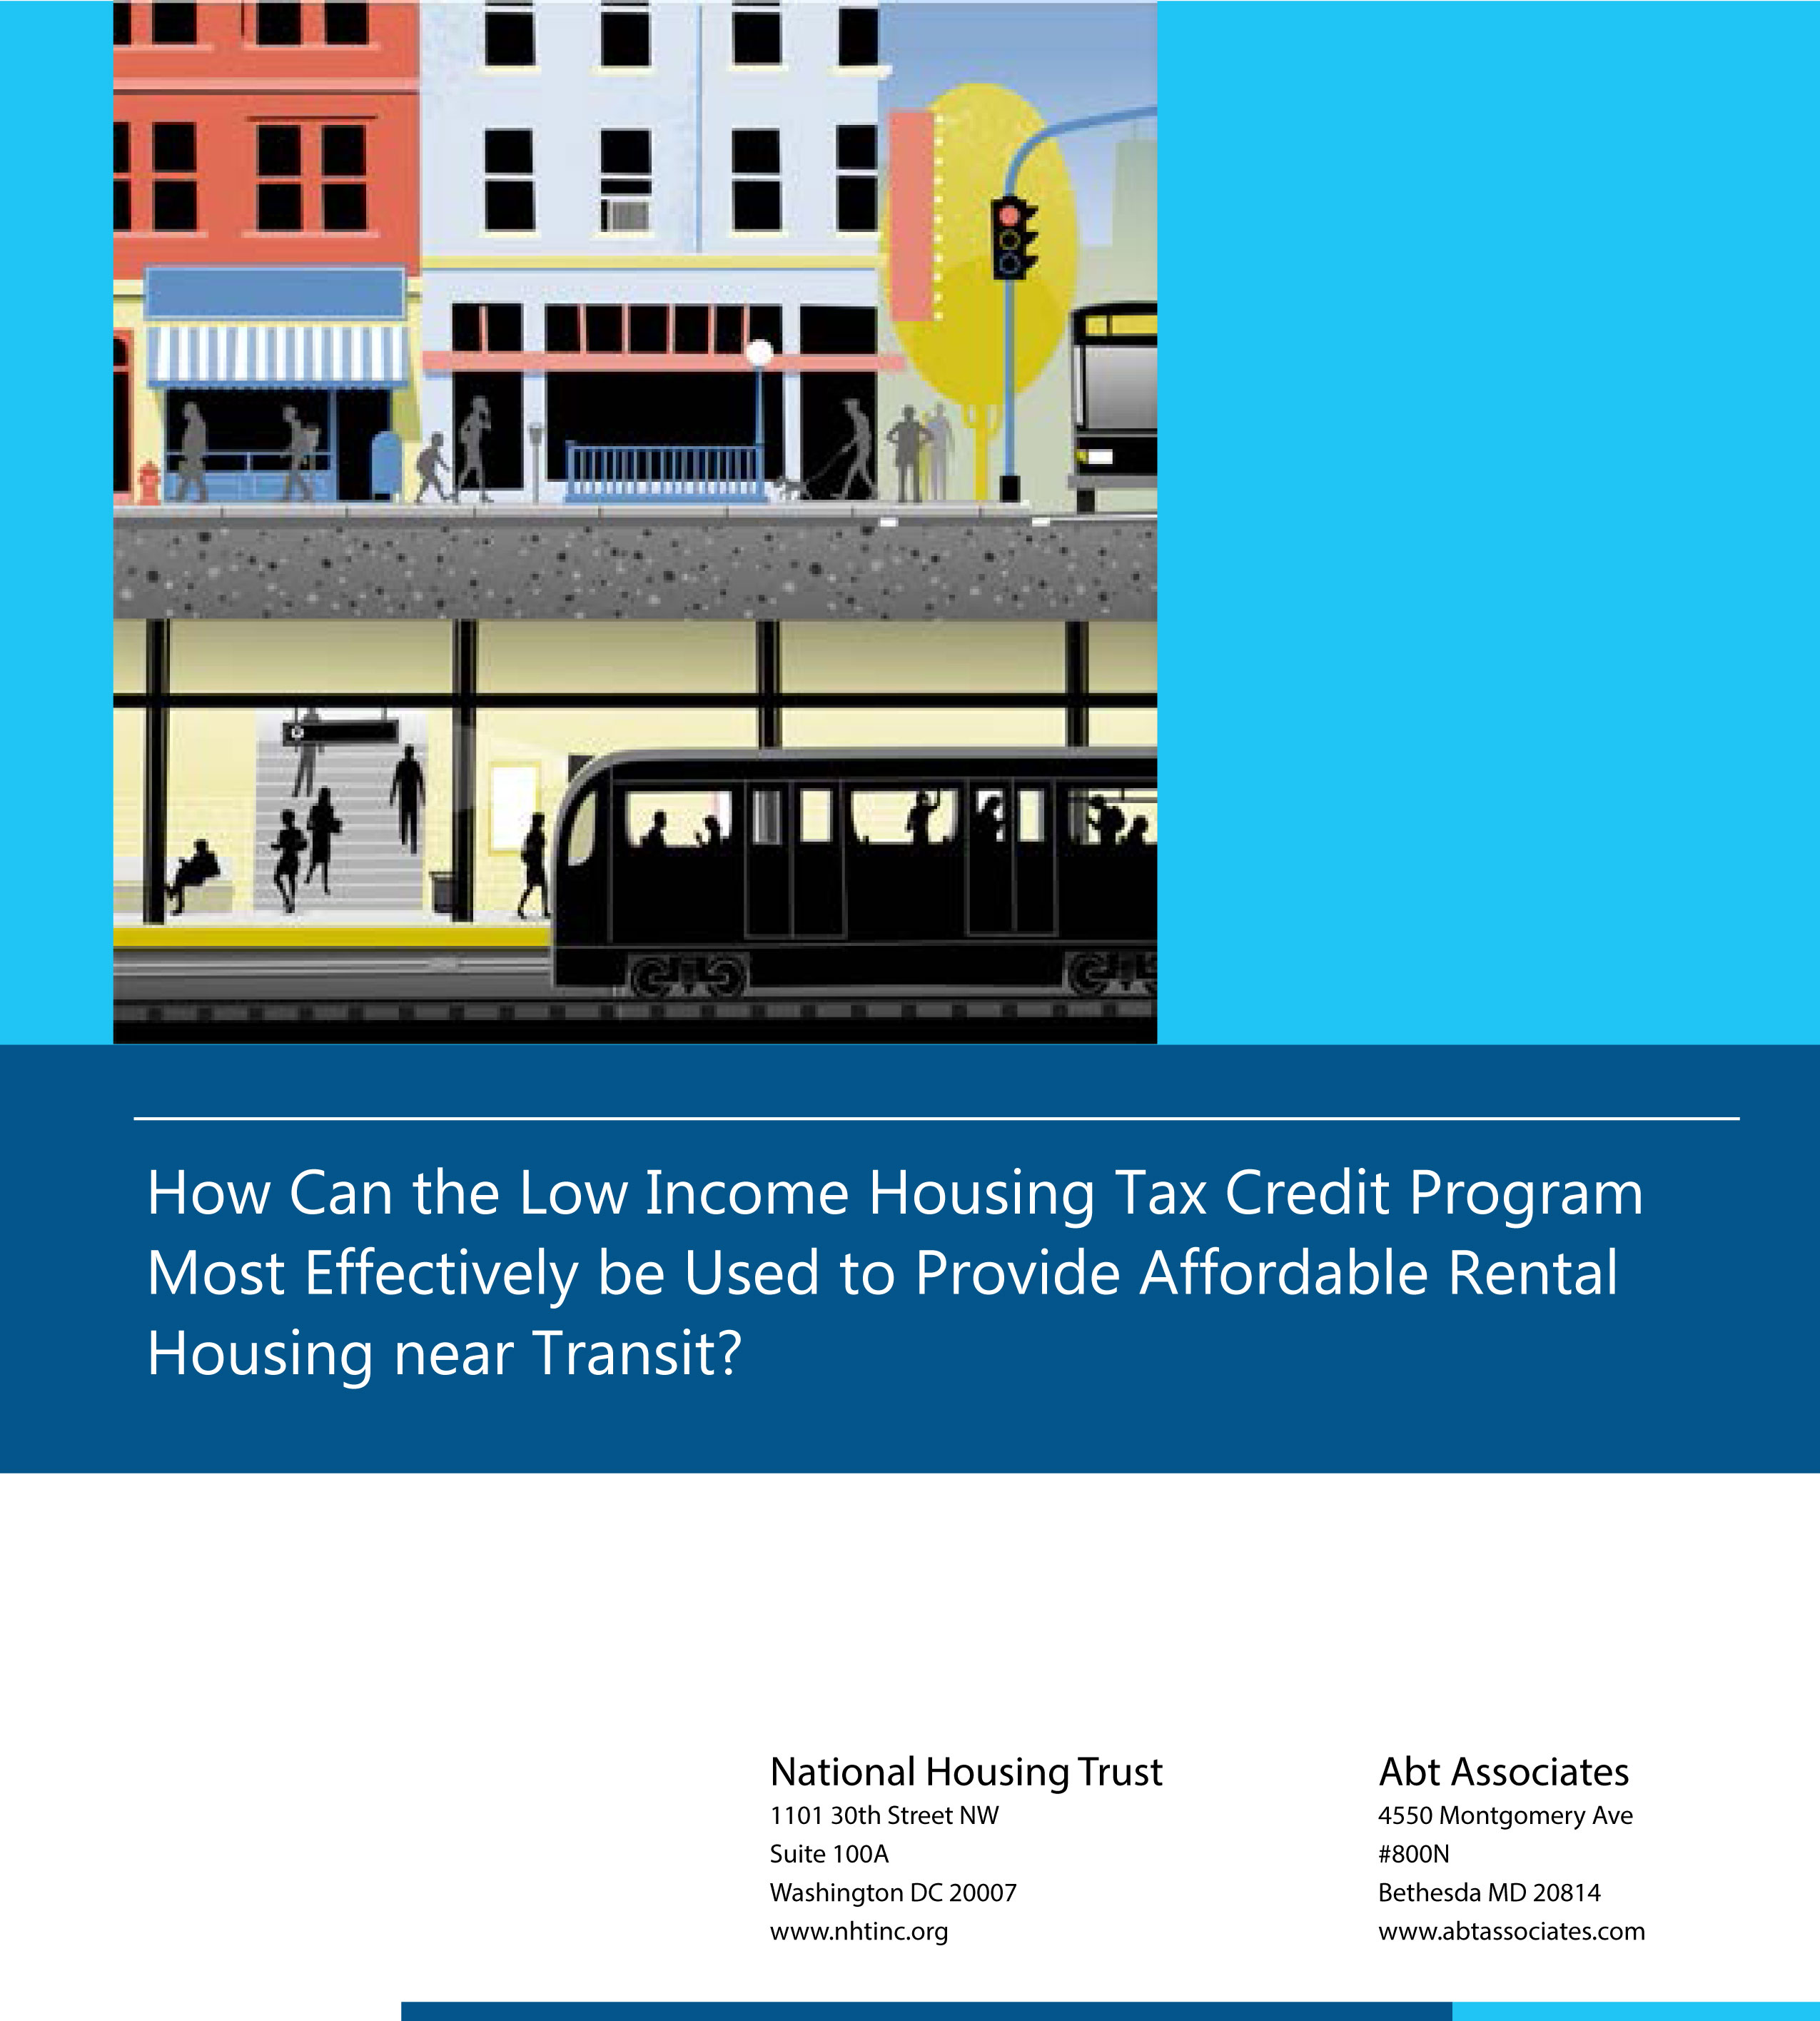 How can LIHTC help provide affordable rental housing near transit?